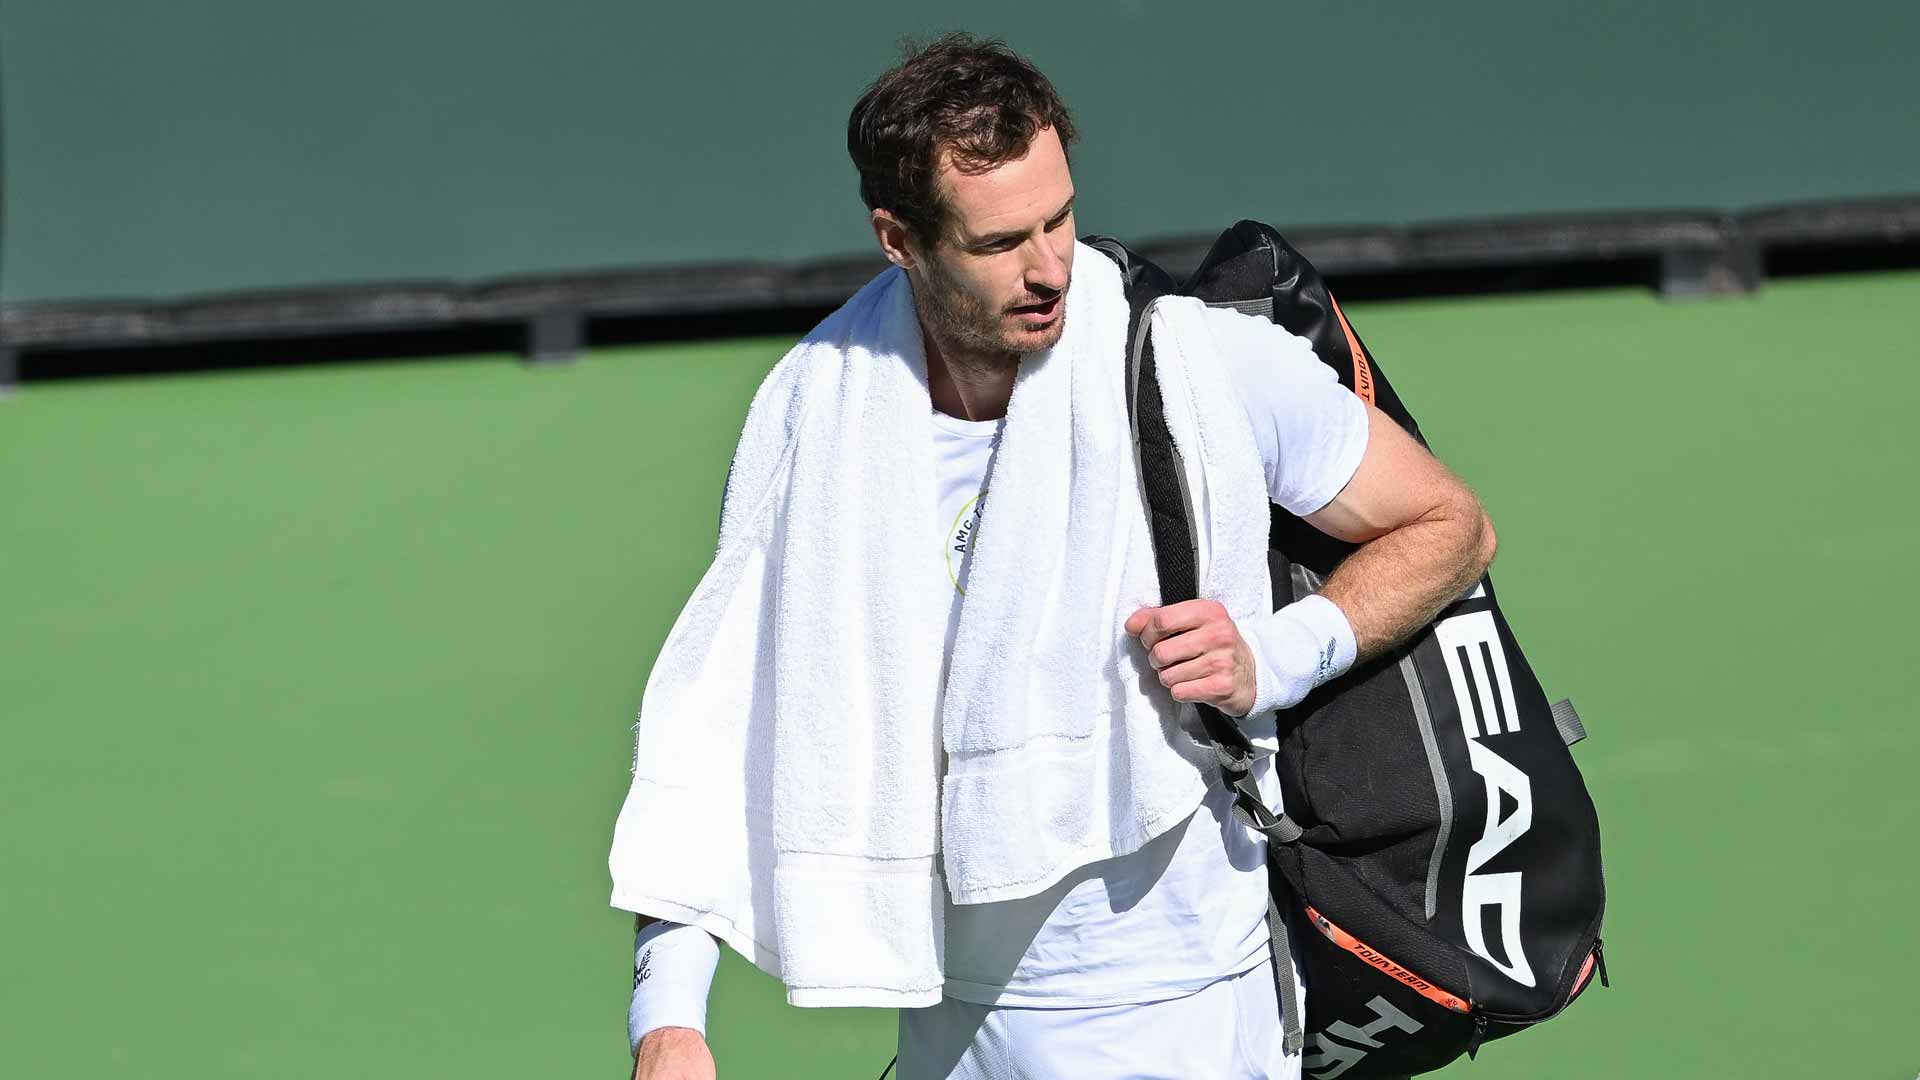 Andy Murray will be in action Thursday at the 2023 BNP Paribas Open.